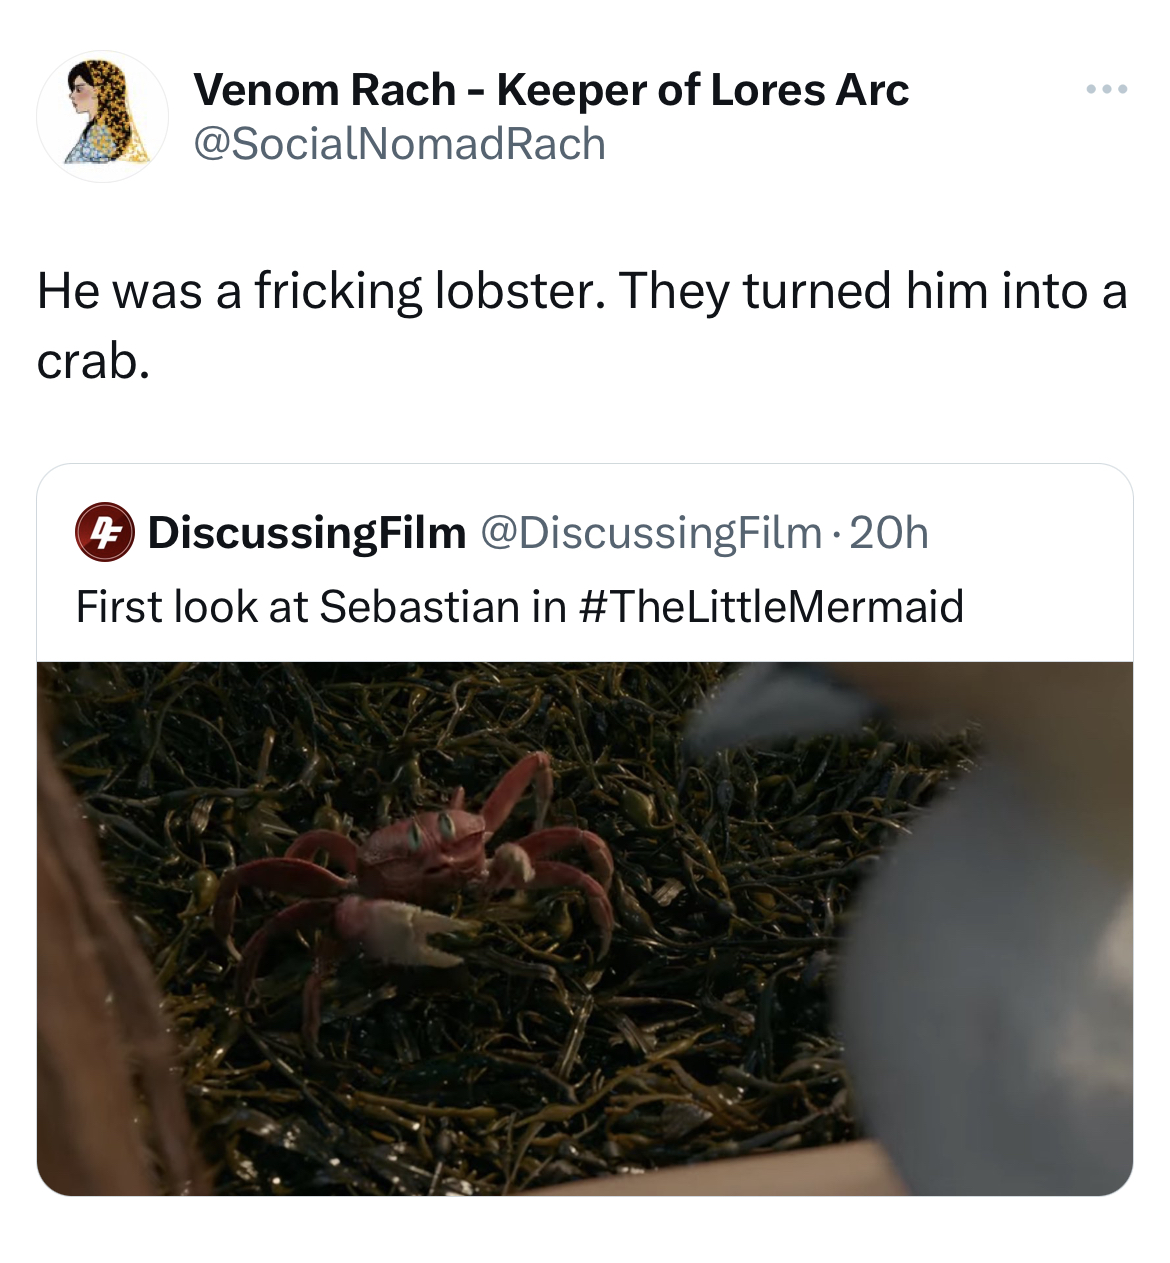 savage tweets - fauna - Venom Rach Keeper of Lores Arc He was a fricking lobster. They turned him into a crab. Discussing Film 20h First look at Sebastian in Little Mermaid